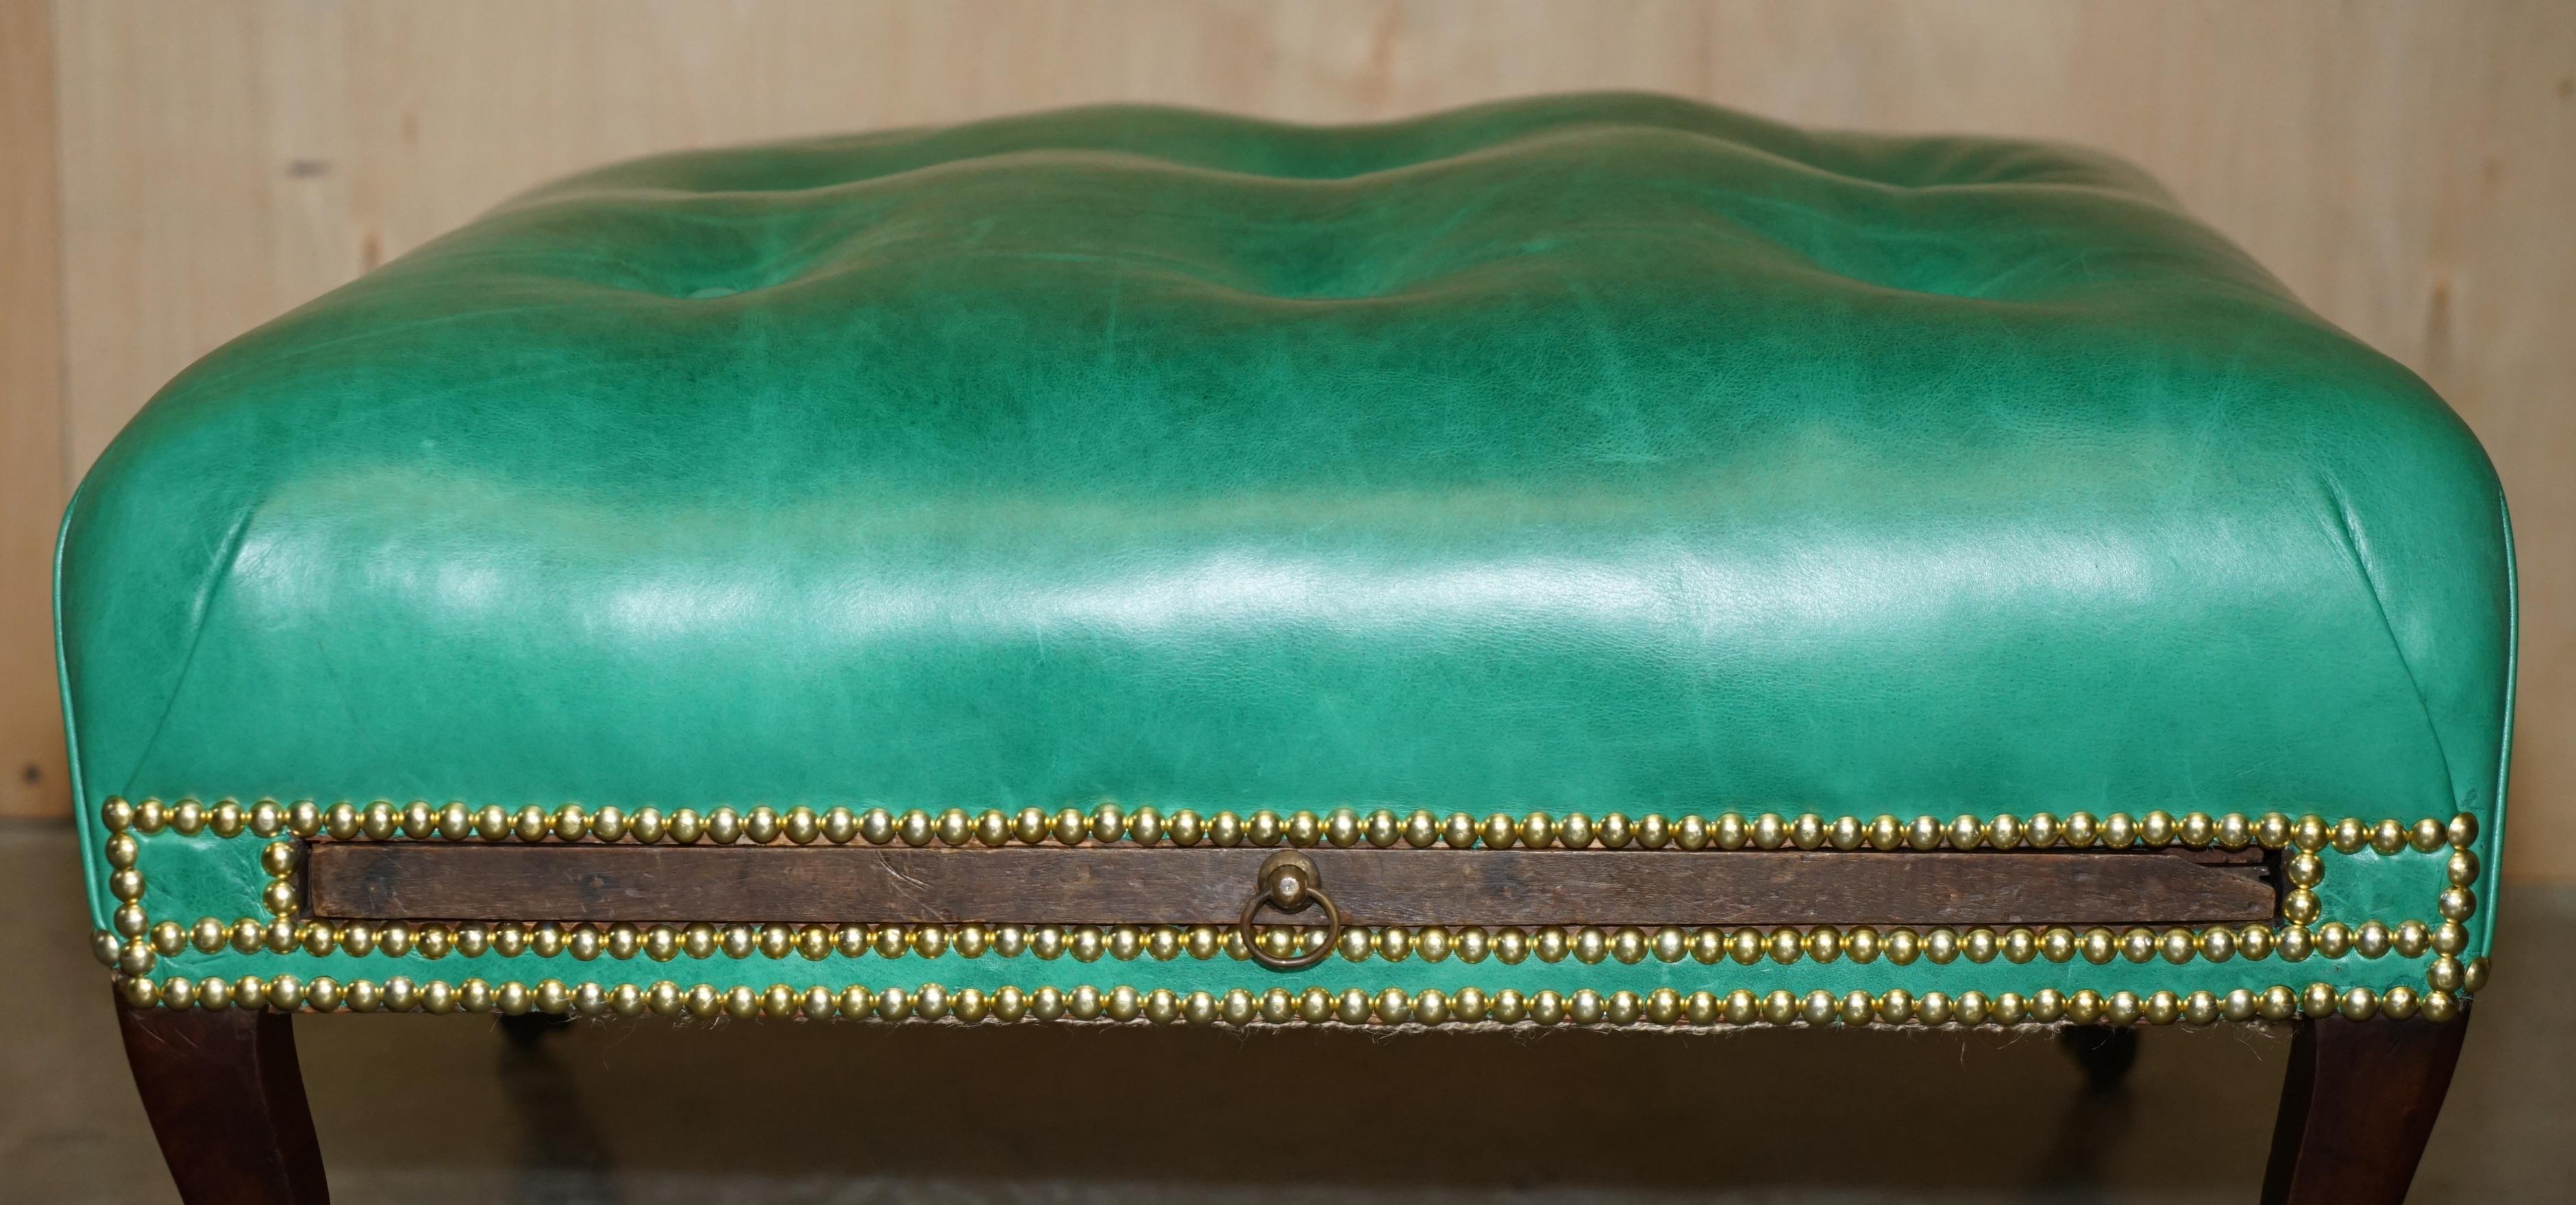 Mid-18th Century RARE ANTIQUE GEORGIAN 1760 CHESTERFIELD LEATHER FOOTSTOOL WiTH SLIP SERVING TRAY For Sale